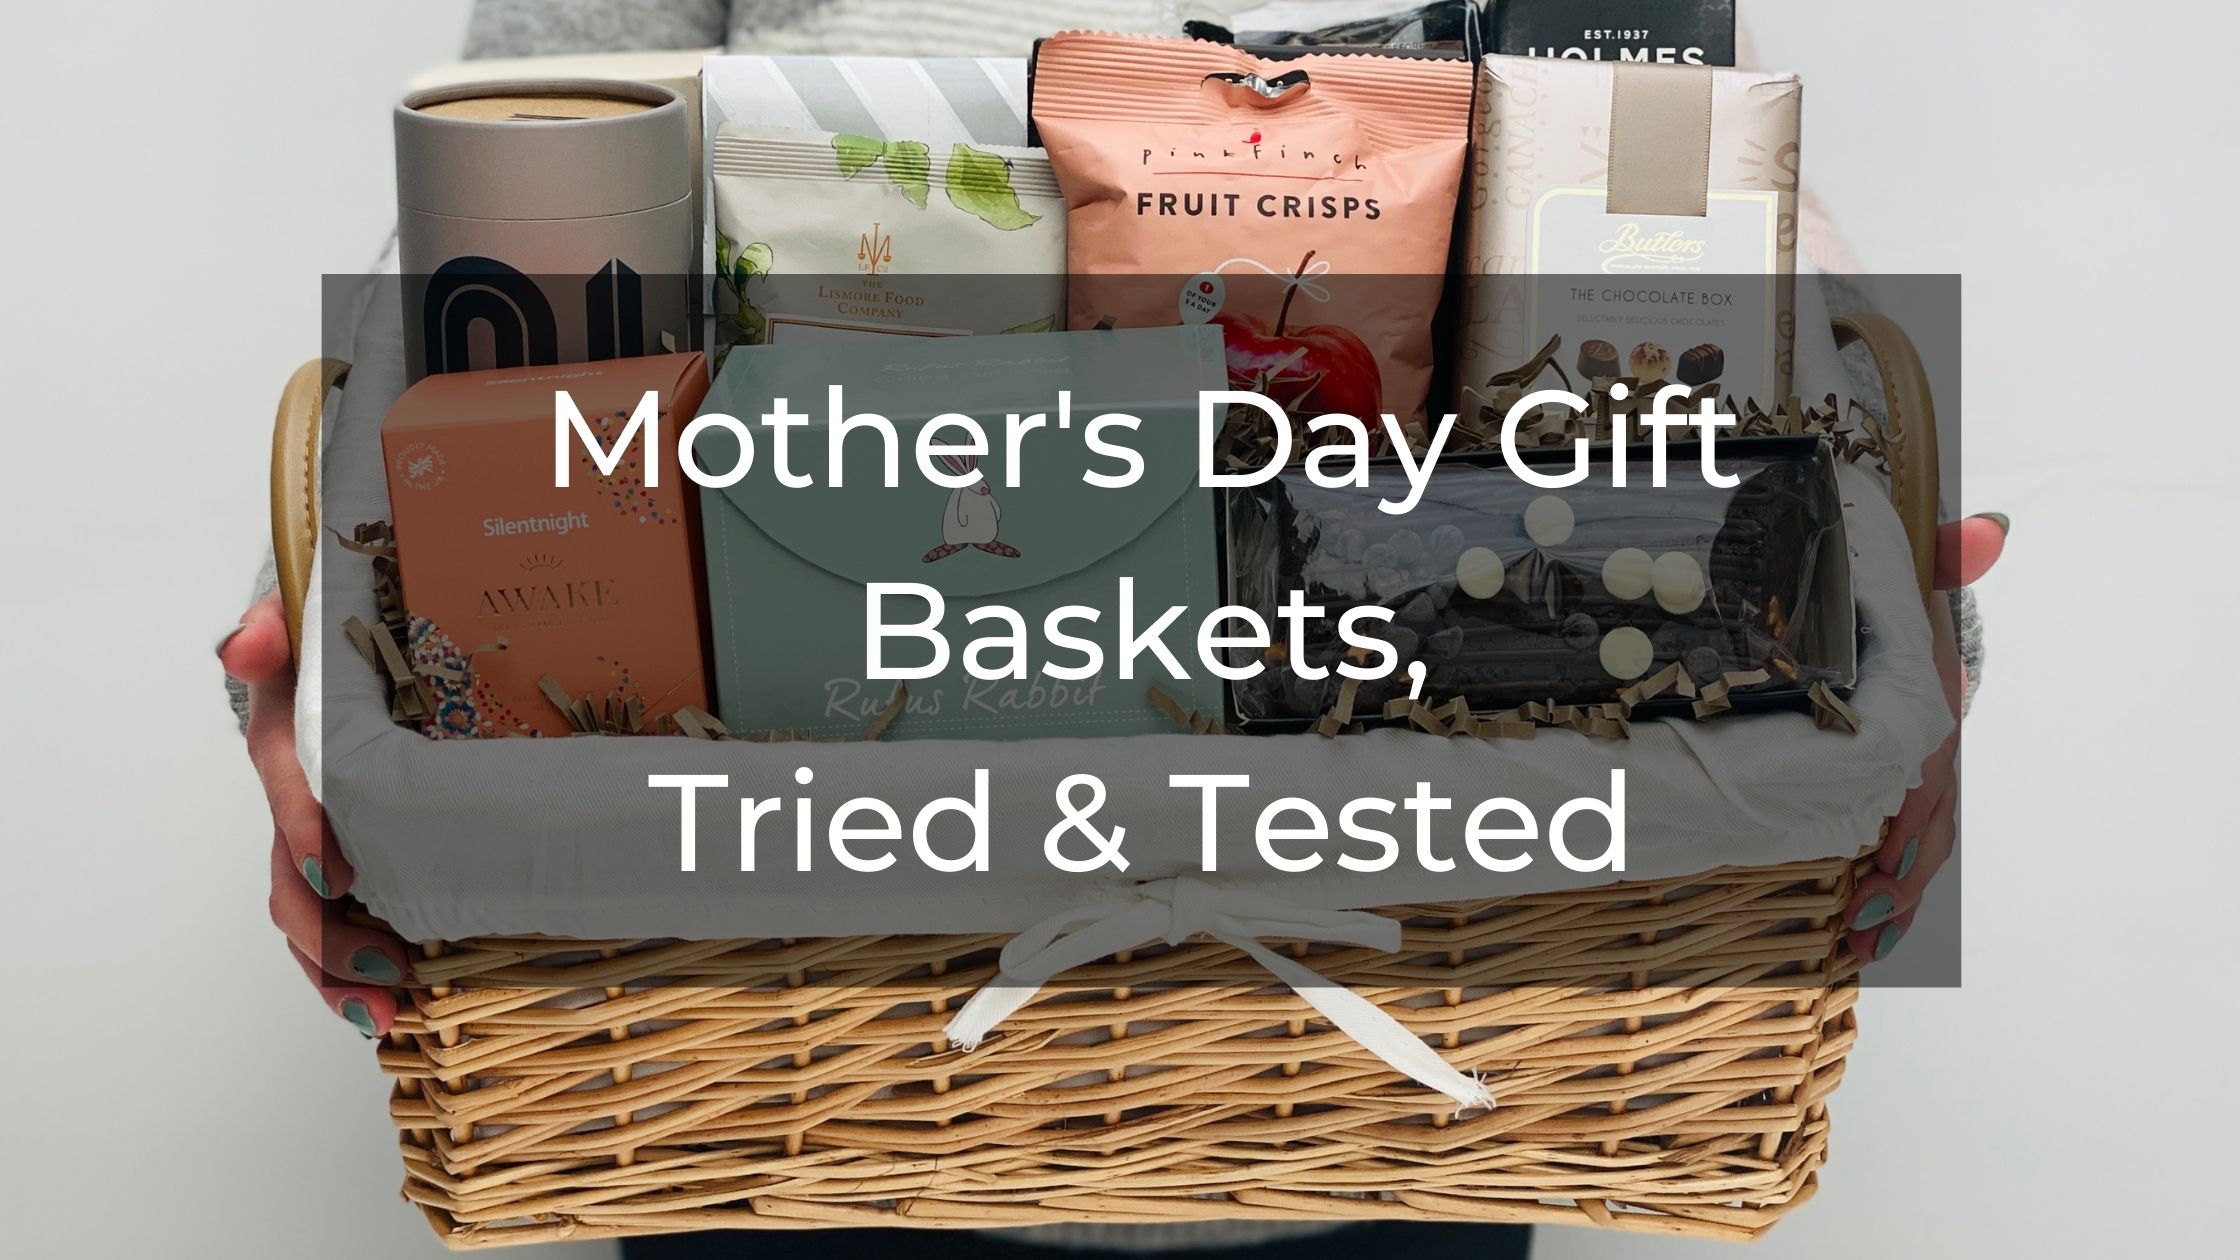 Mother's Day Gift Baskets - Tried & Tested